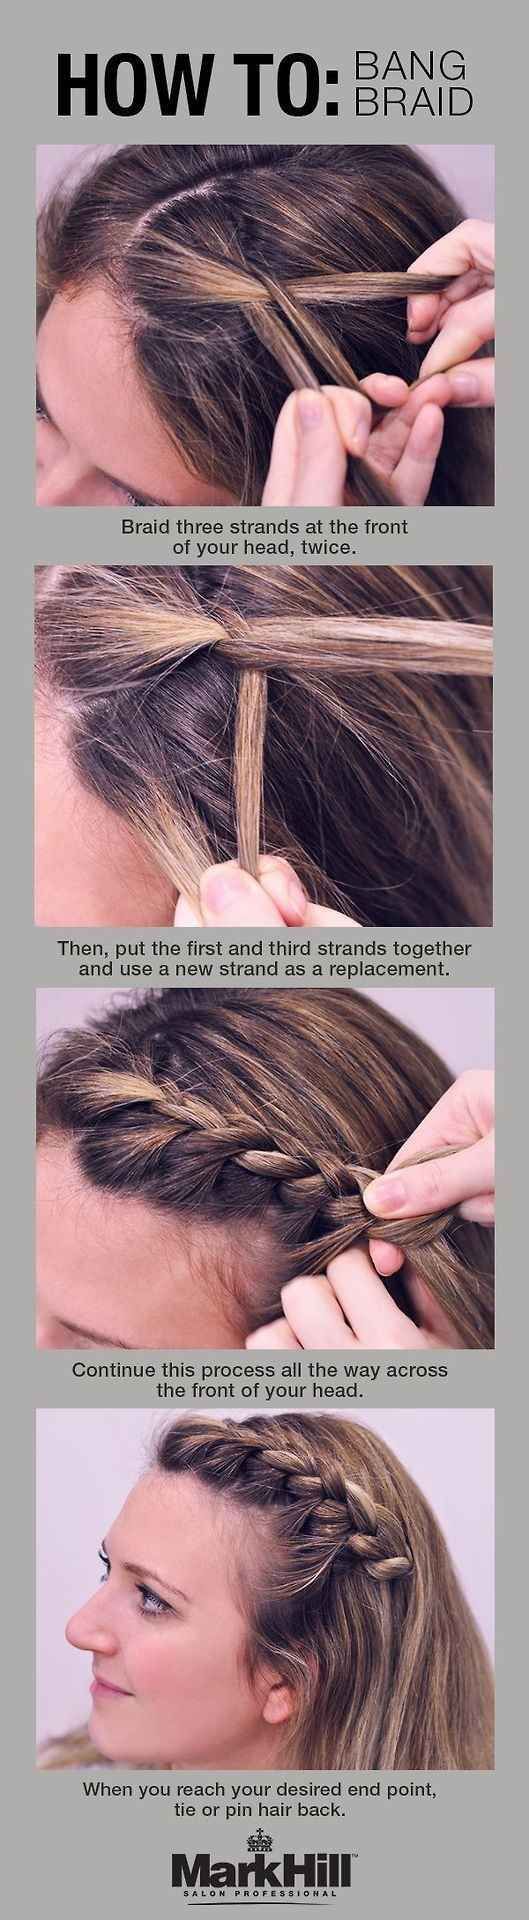 The bang braid is your solution to keeping annoying mid-level bangs off your face. | 18 Ingenious Hair Hacks For The Gym